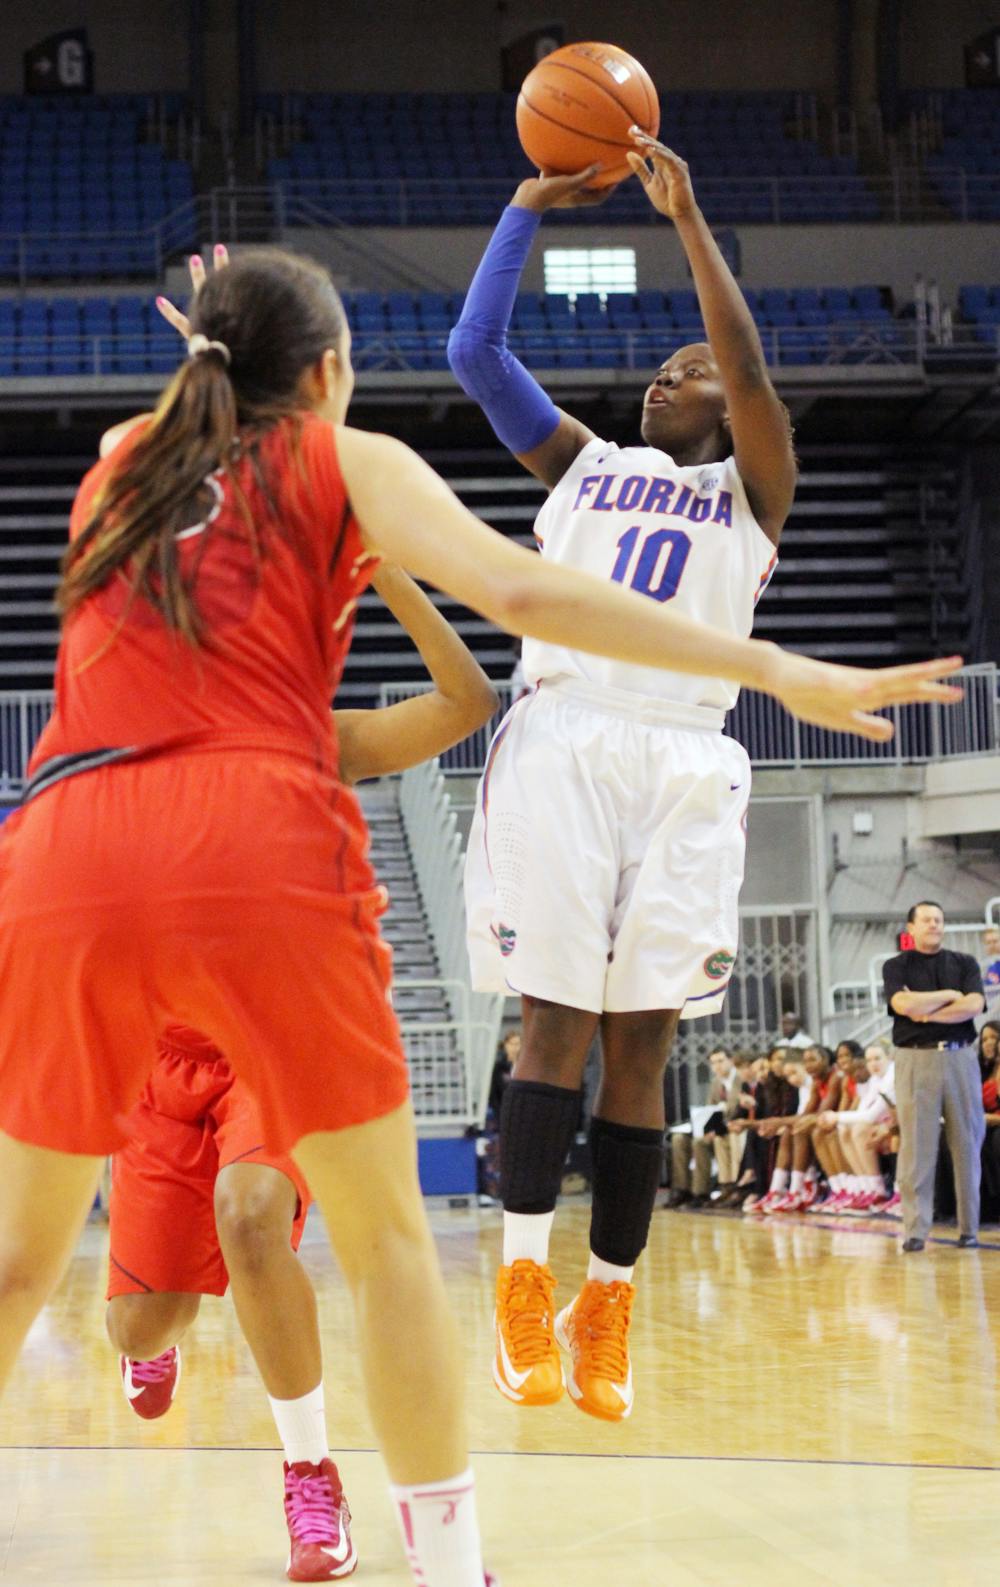 <p><span>Junior point guard Jaterra Bonds (10) shoots during Florida’s 62-57 loss to Georgia on Feb. 17 in the O’Connell Center. Bonds scored 17 points in Florida's 64-59 victory against Arkansas in the SEC Tournament on Thursday. </span></p>
<div><span><br /></span></div>